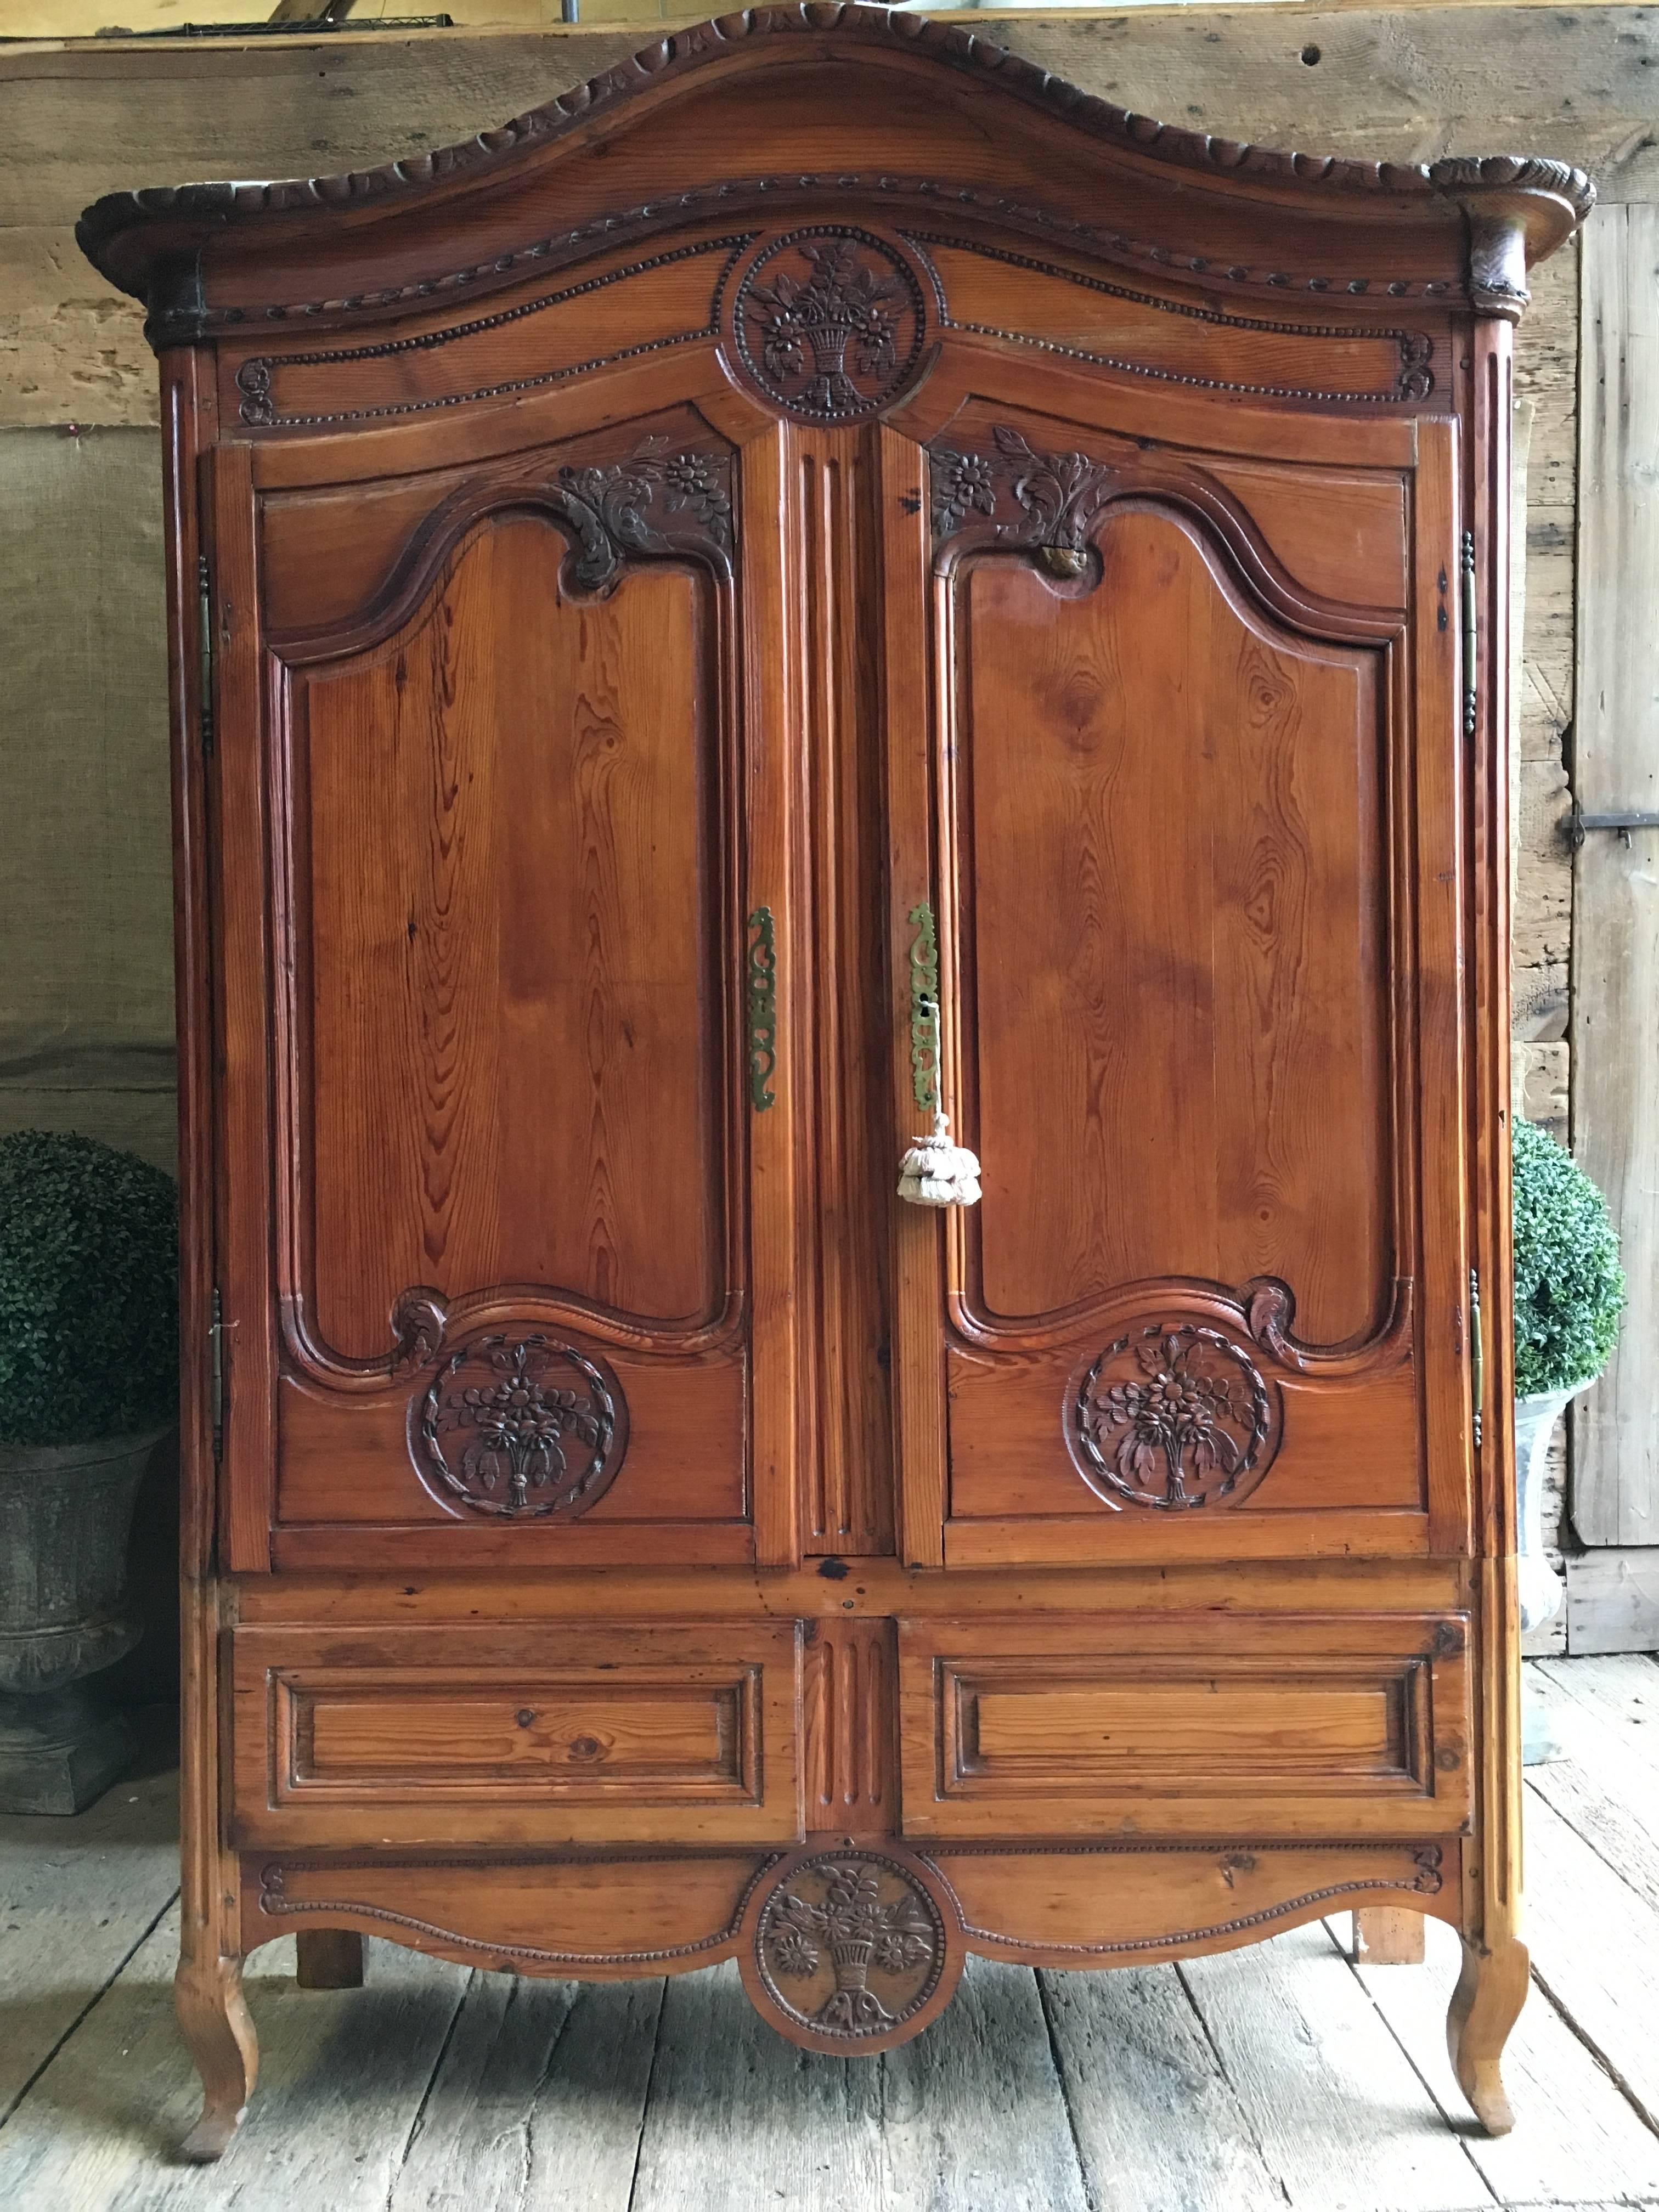 A petite Louis XV pine wedding armoire from Normandy France, circa 1800, with an arched cornice over two doors, nicely carved with bouquets of flowers etc., over two drawers, all on cabriole legs. There is a label on the interior of one door from